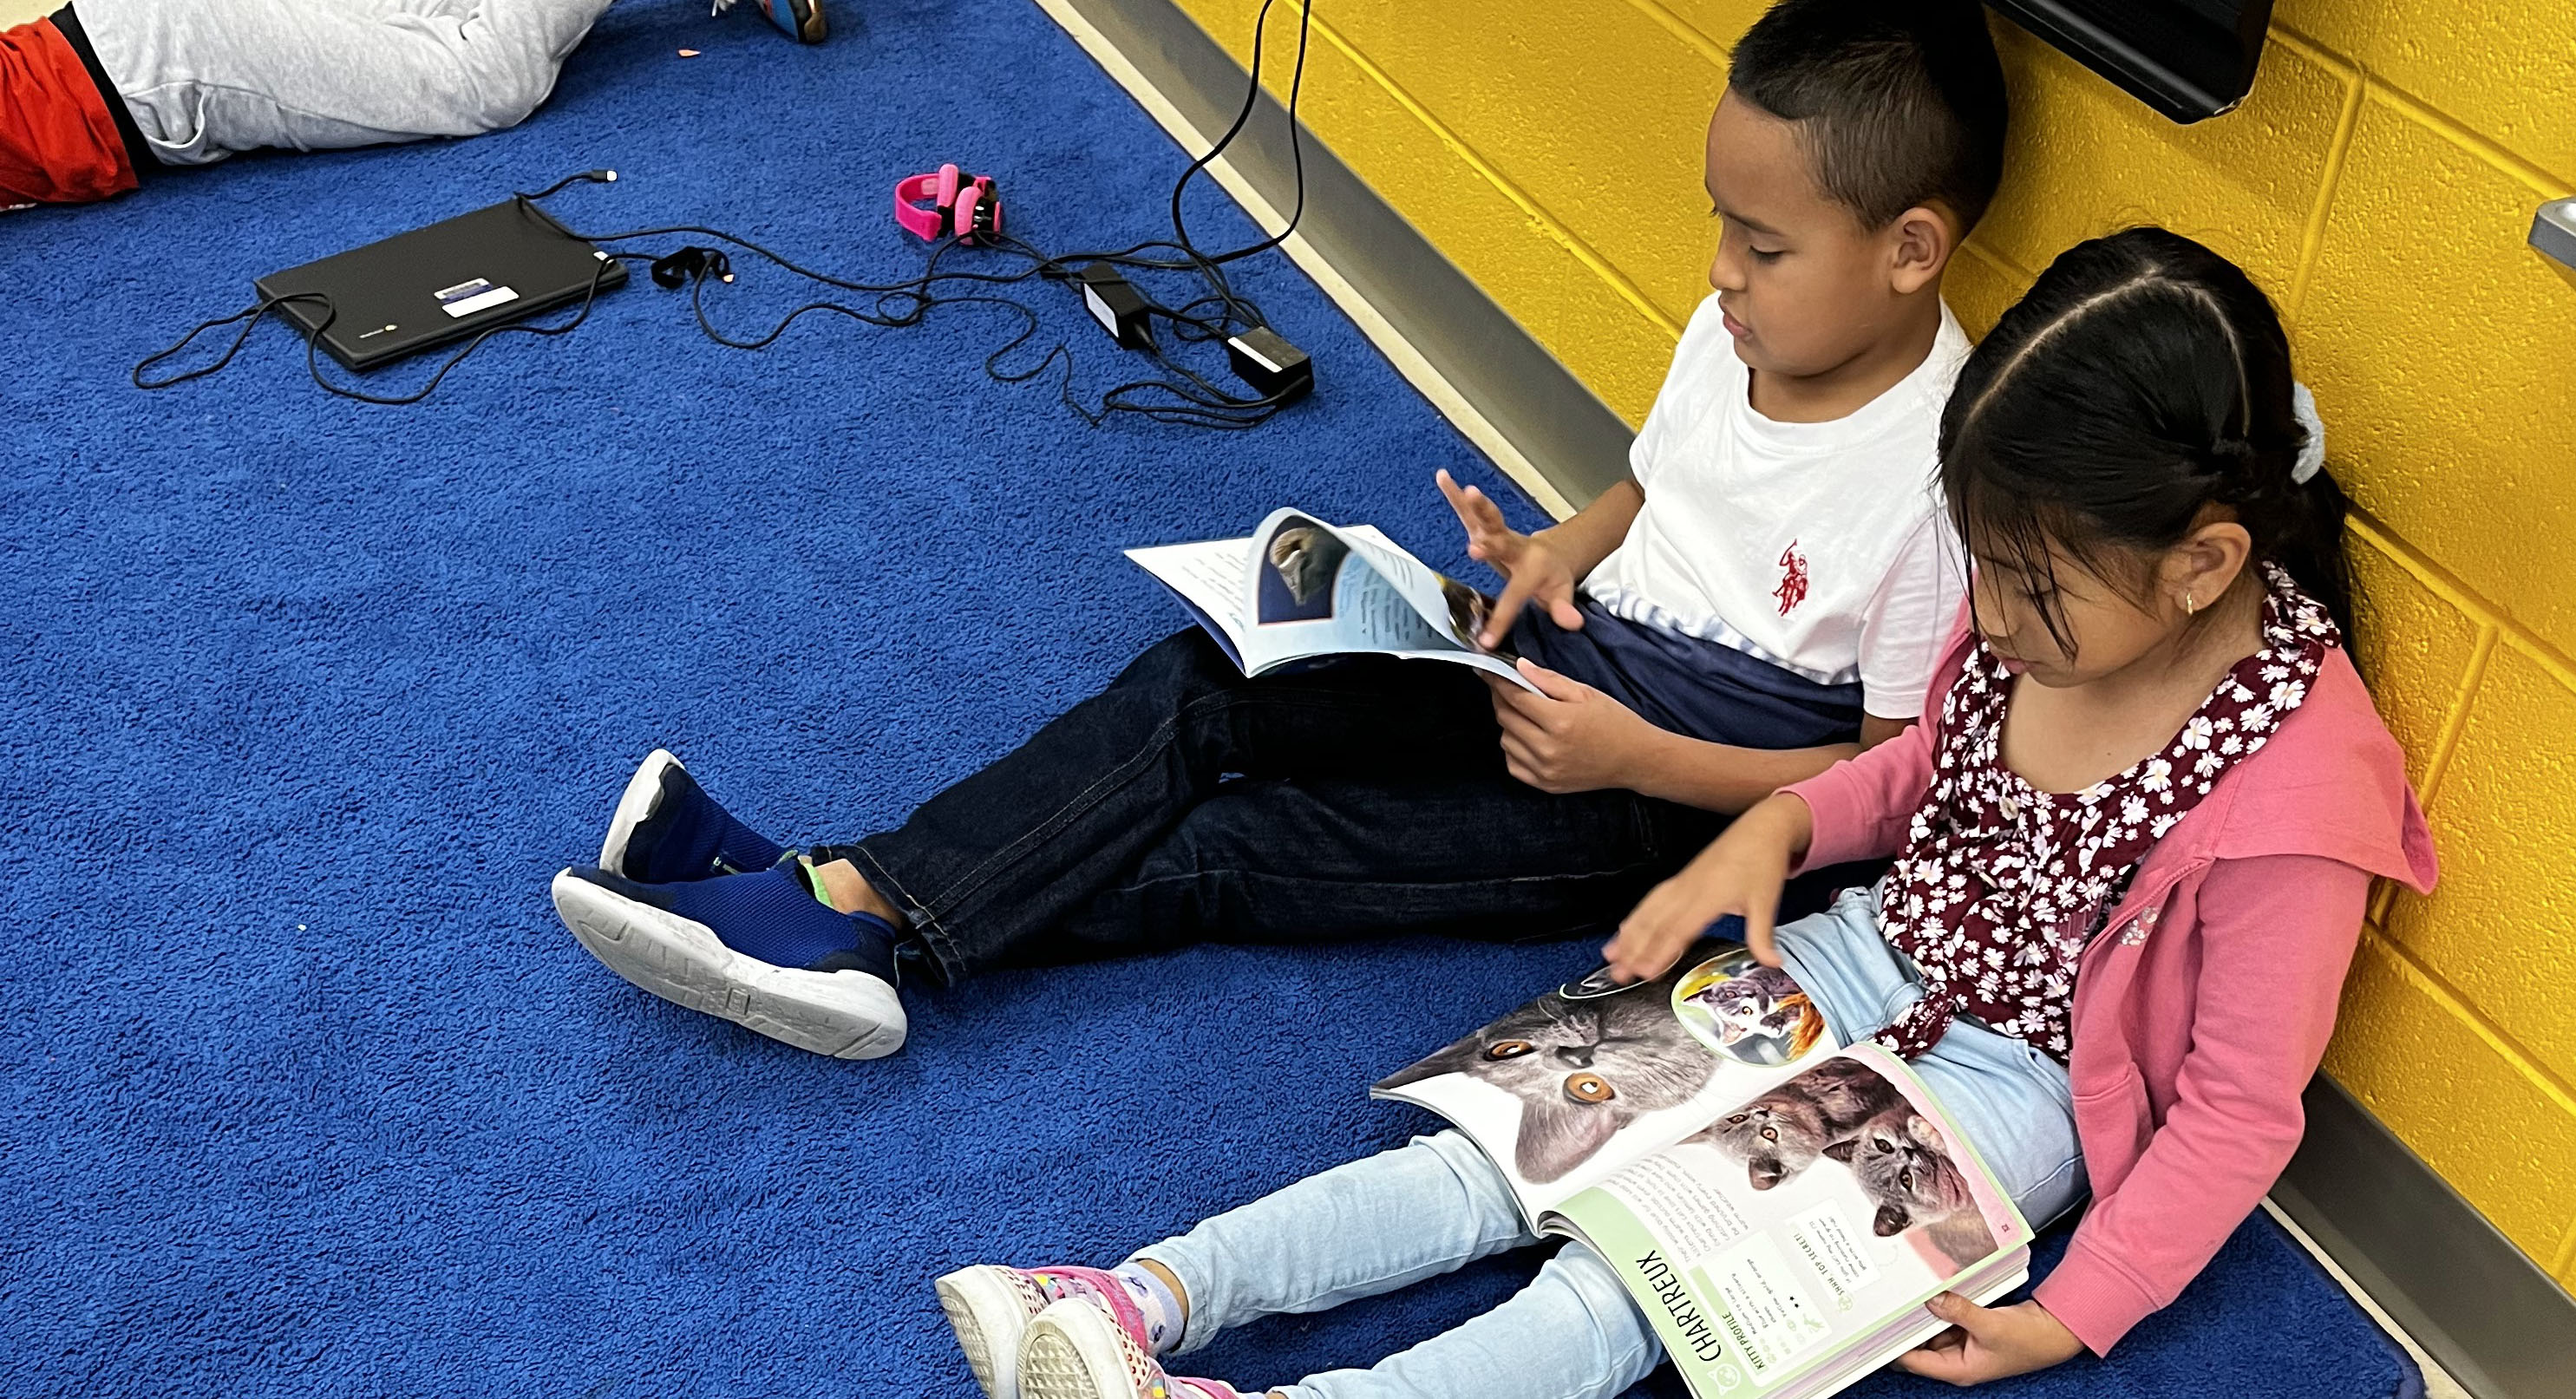 Two students reading books on the carpet